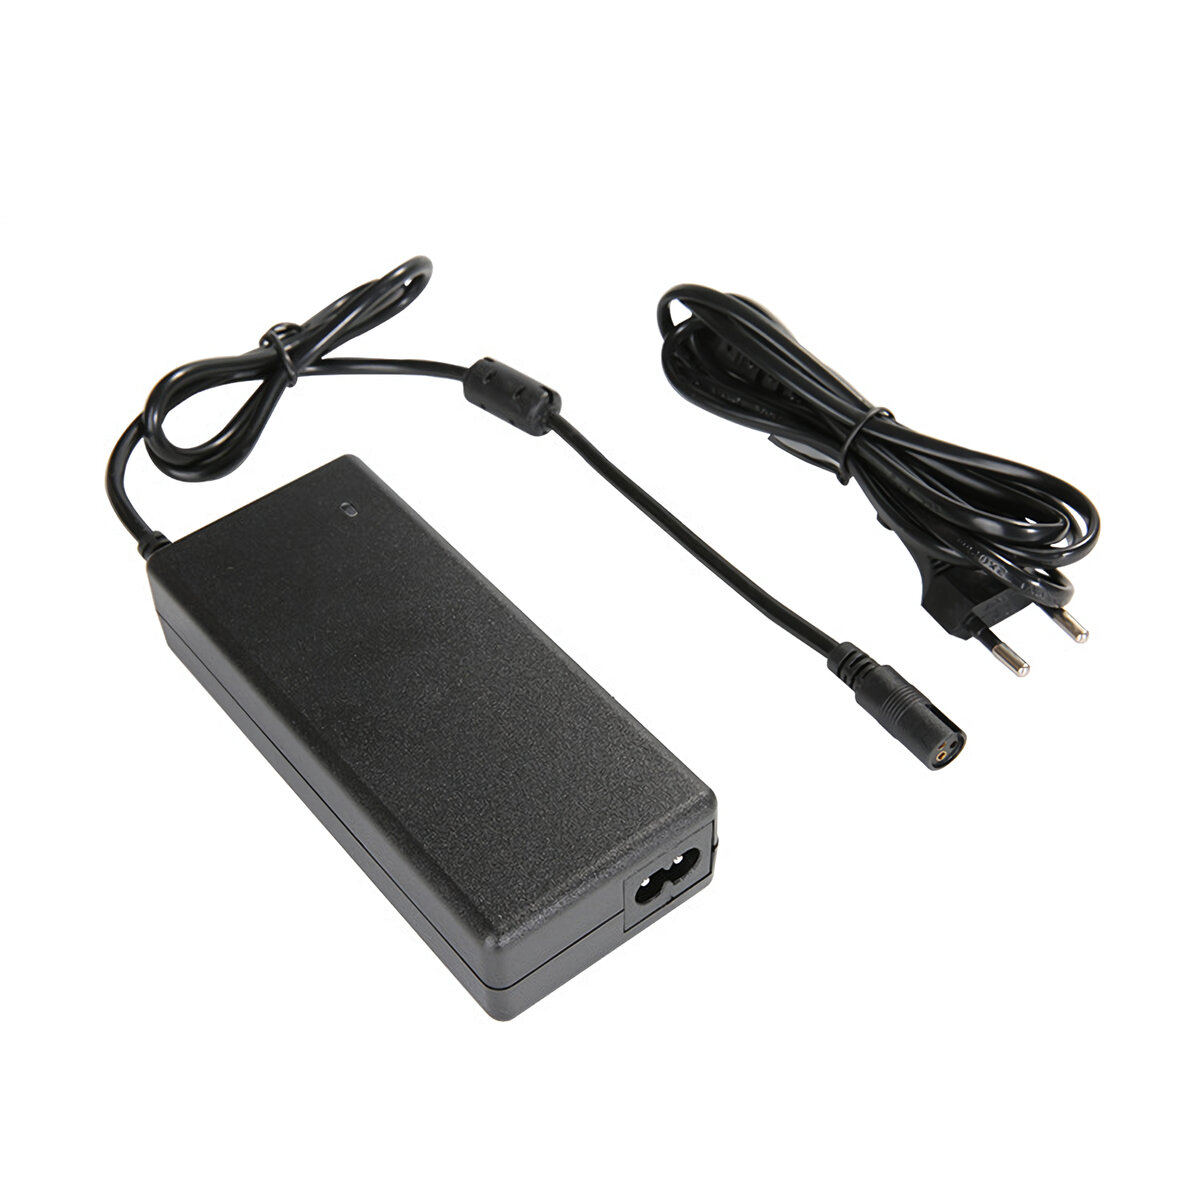 

90W AC Power Supply Universal Laptop Adapter Charger EU Plug 20V 4.5A Charger with 13 Terminal Adapters for Lenovo Asus